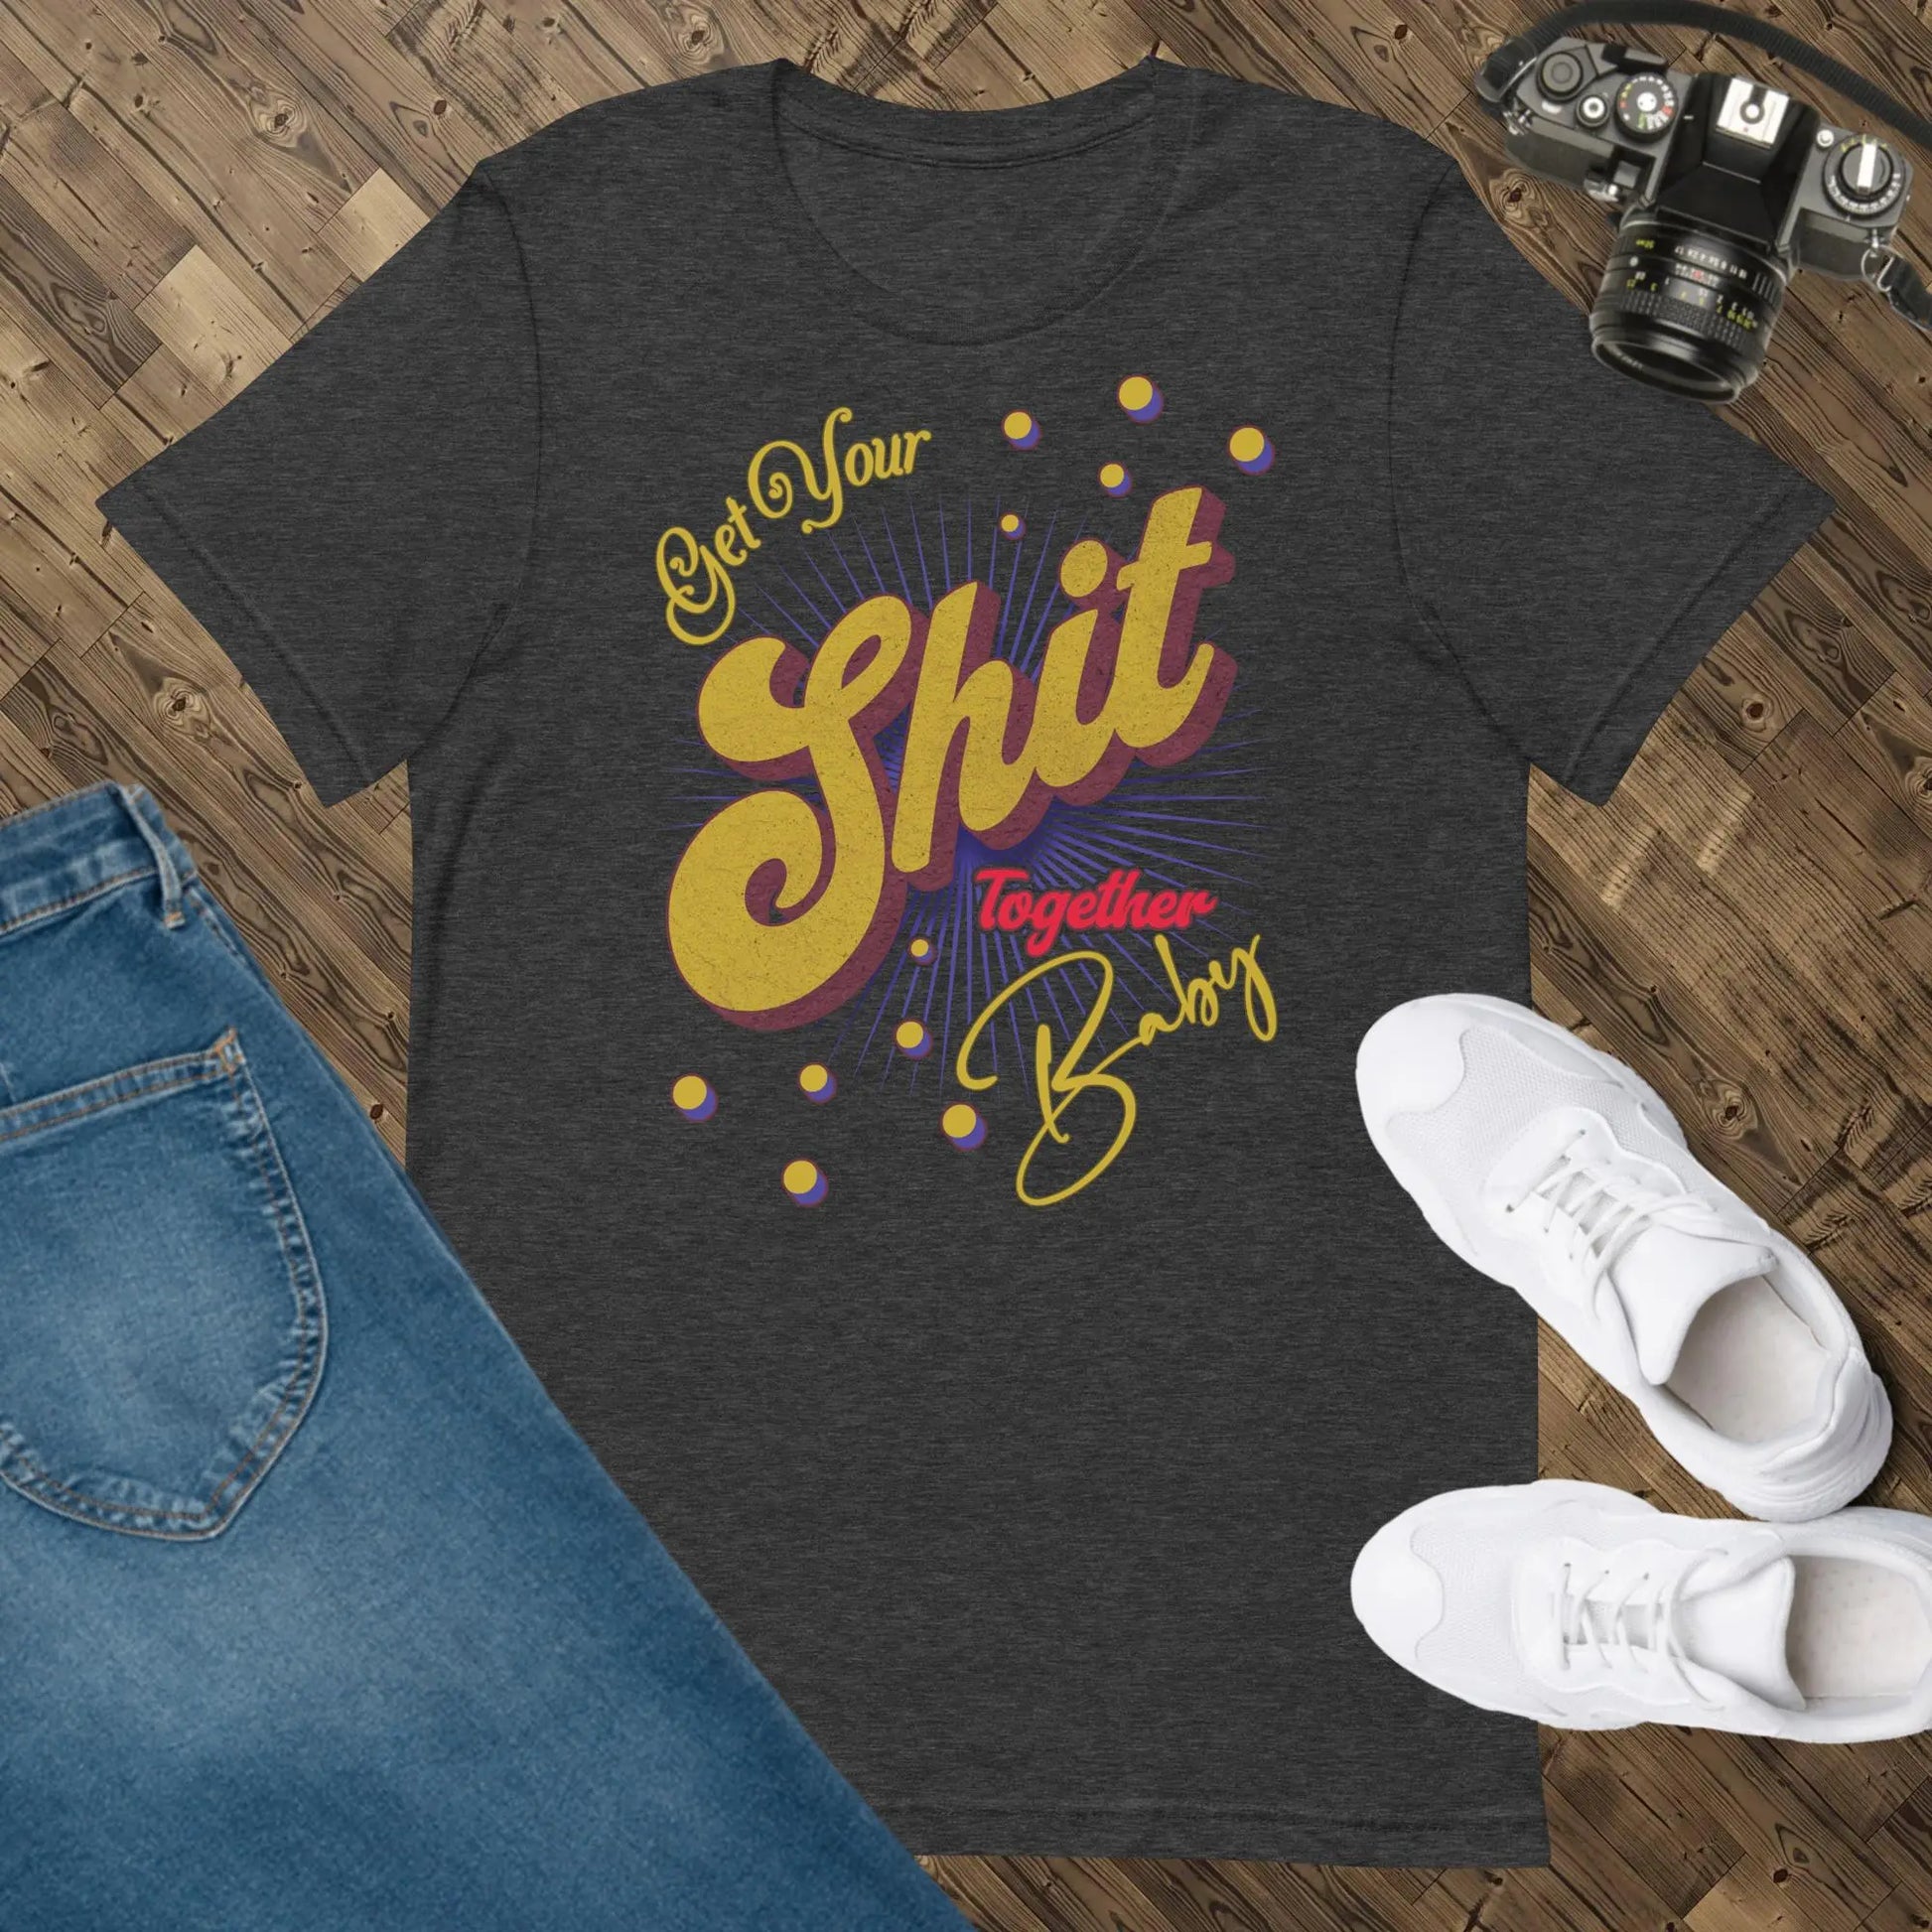 Get Your Shit Together Unisex t-shirt by BC Ink Works - BC Ink Works